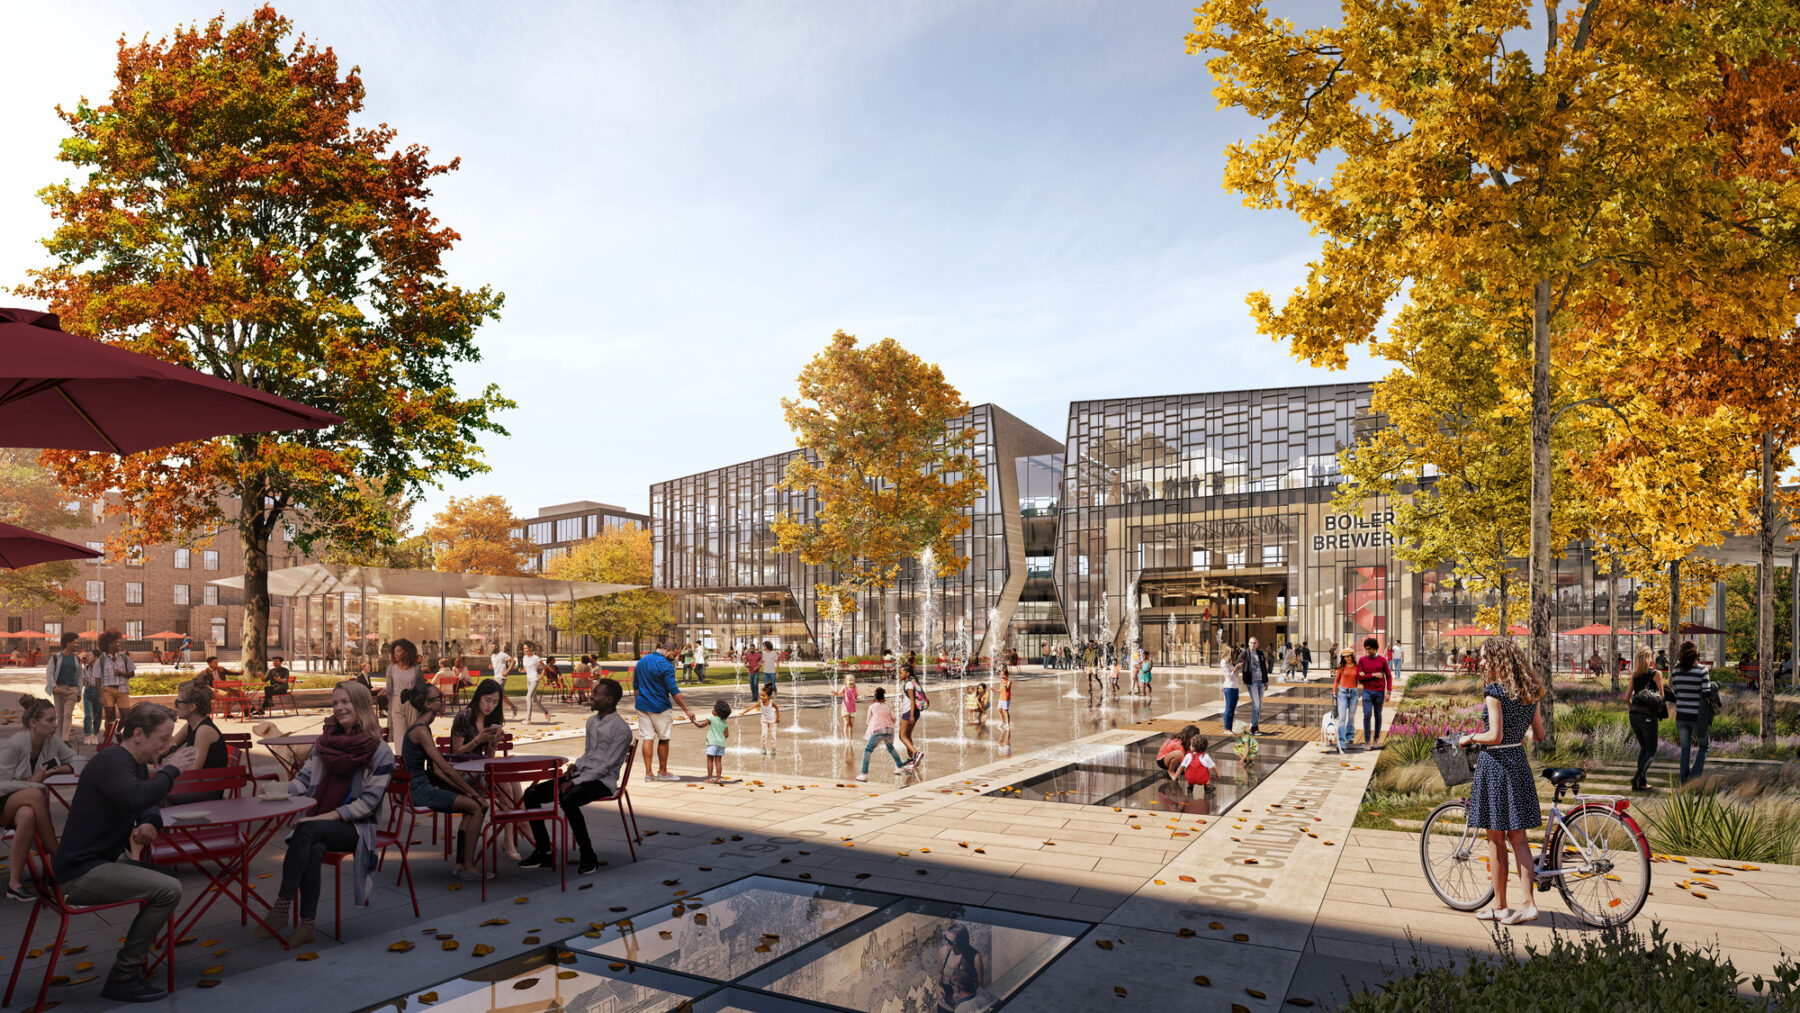 Rendering of the quad showing outdoor gather spaces in the autumn with colorful foliage, cafe seating, and pedestrians and cyclists